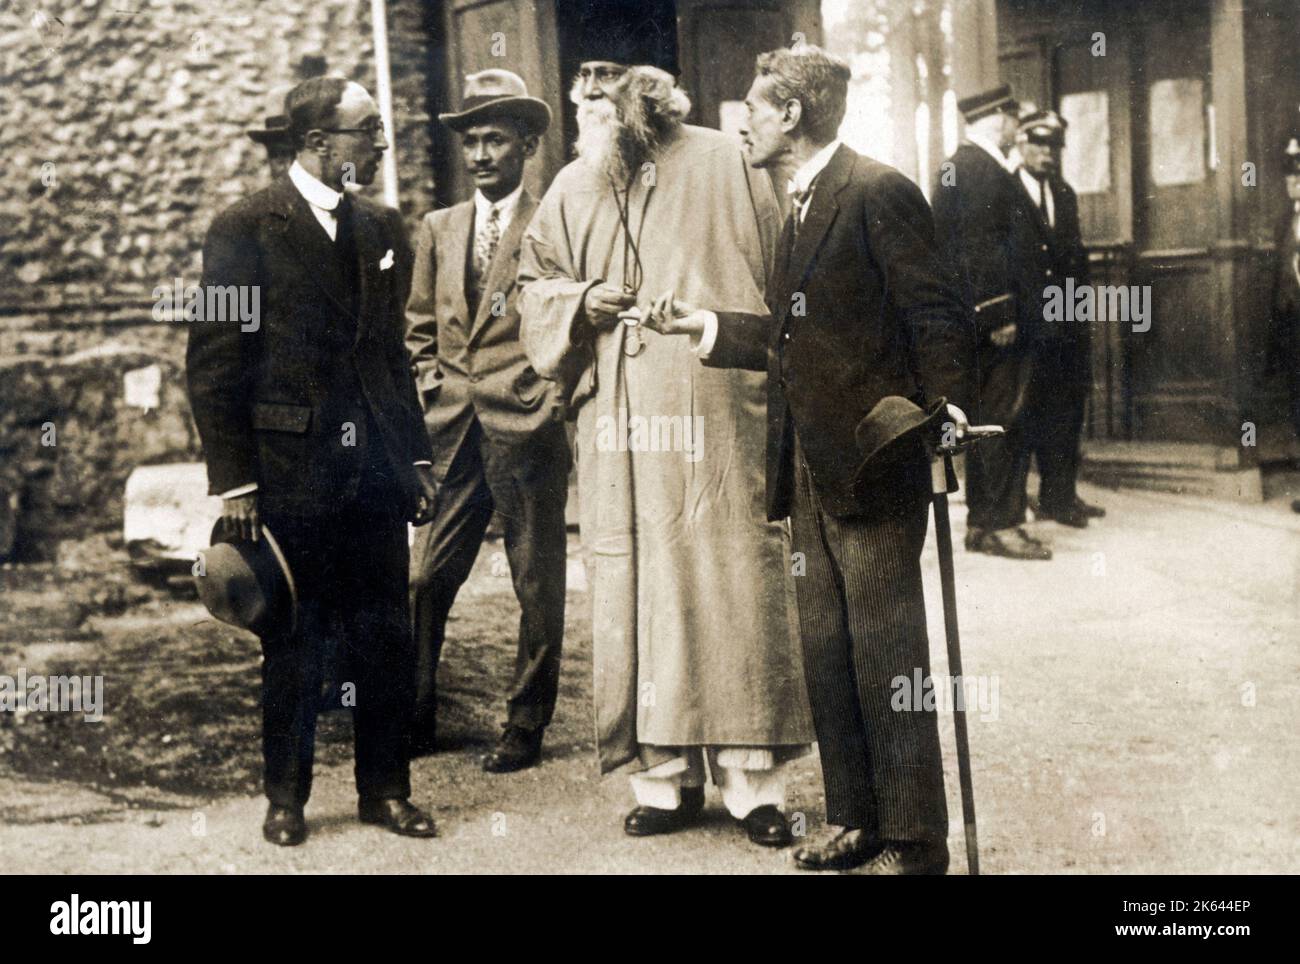 Rabindranath Tagore FRAS (born Robindronath Thakur) (1861-1941) (also: Gurudev, Kobiguru, Biswakobi) - an Indian polymath, poet, writer, playwright, composer, philosopher, social reformer and painter. Pictured here on his first visit to Germany in 1921. Stock Photo